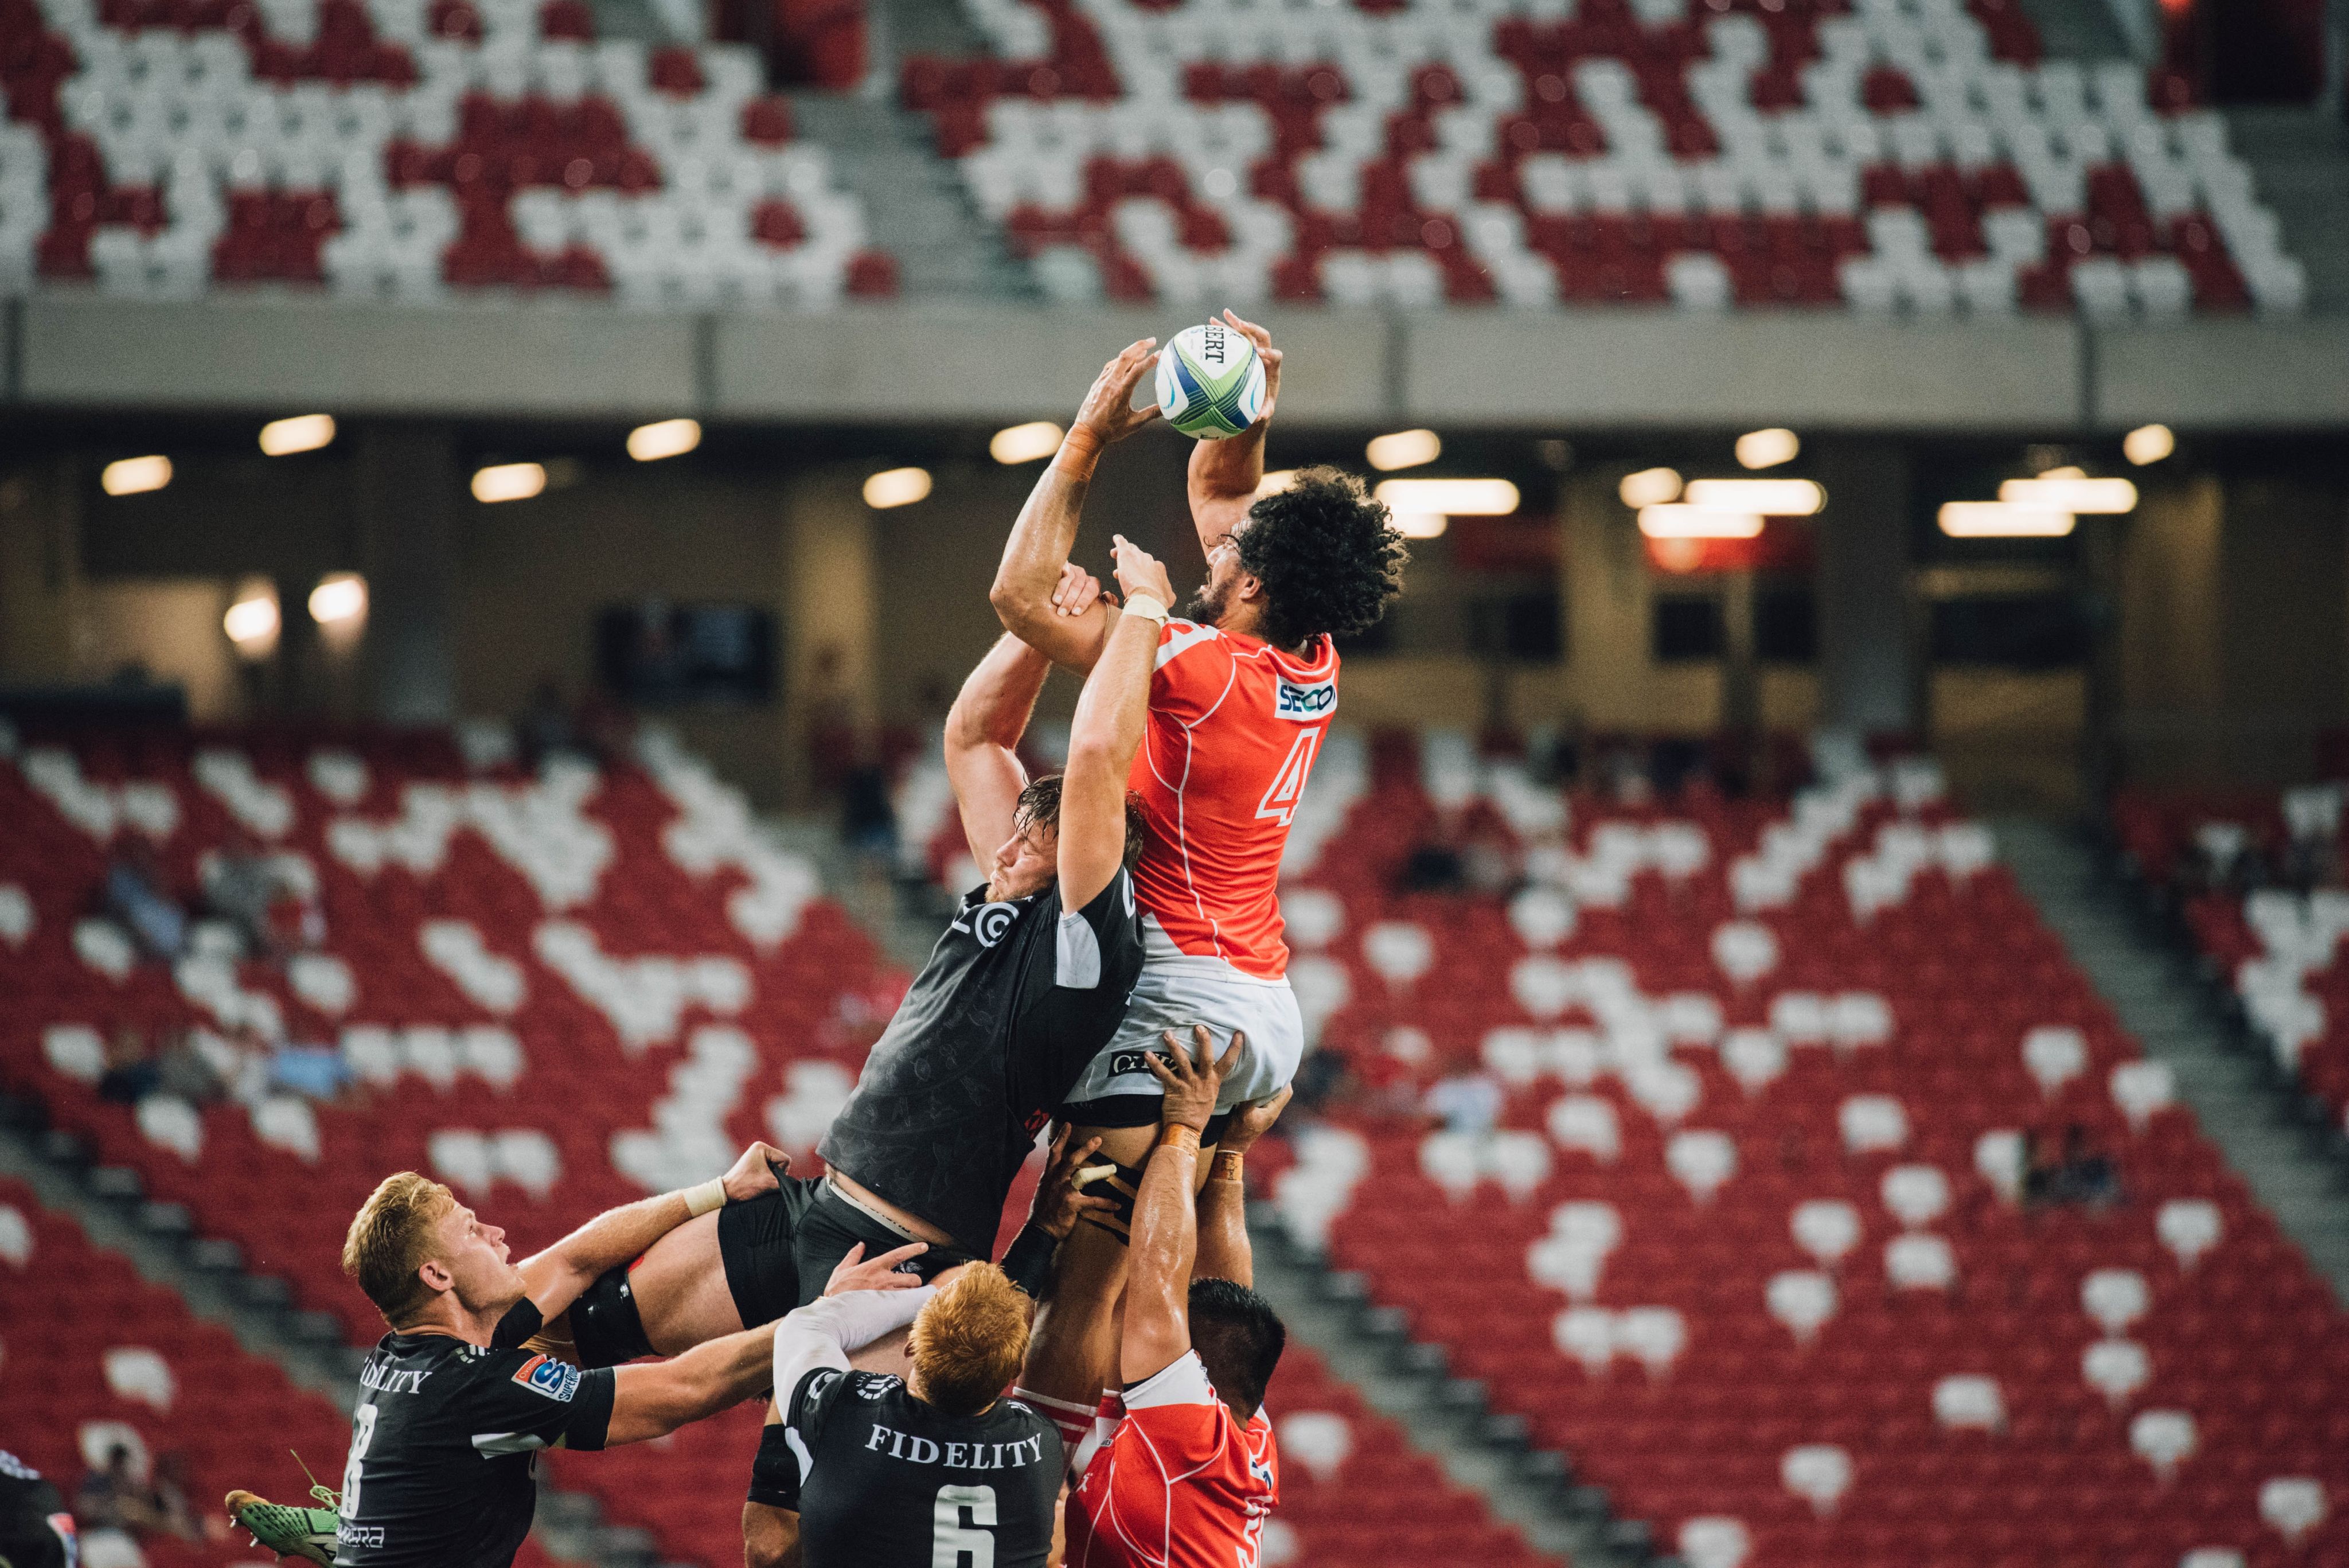 Two people playing sport and leaping to catch a rugby ball. One wears a red shirt and one wears a black shirt.